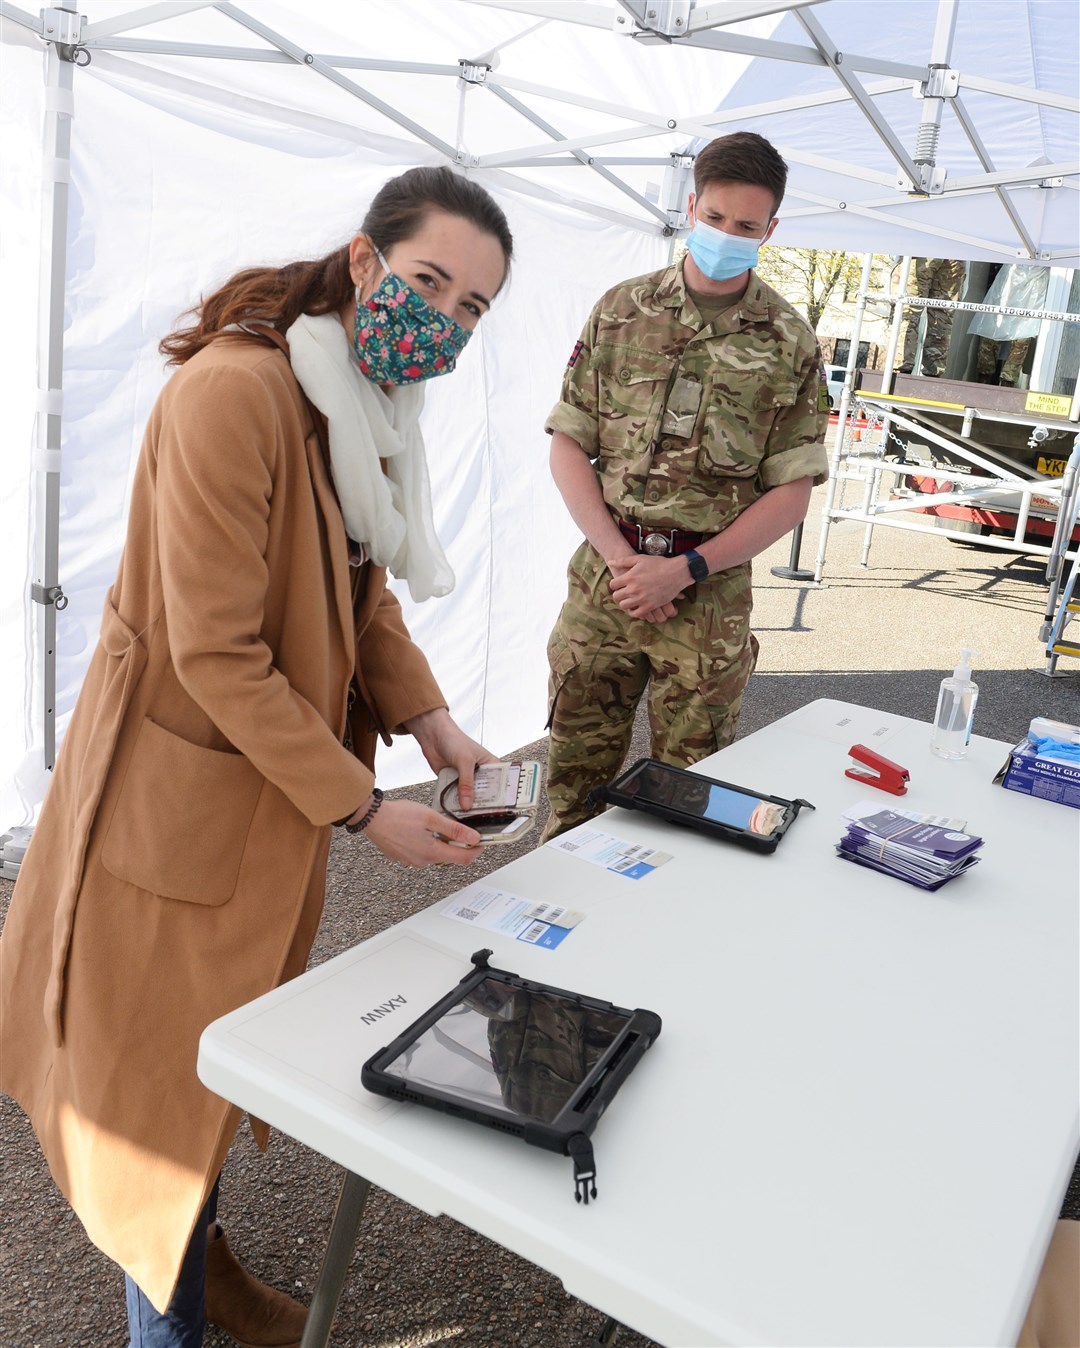 Courier reporter Federica Stefani registering to get her test, with help from LCpl Law of 39 Engineer Regiment.